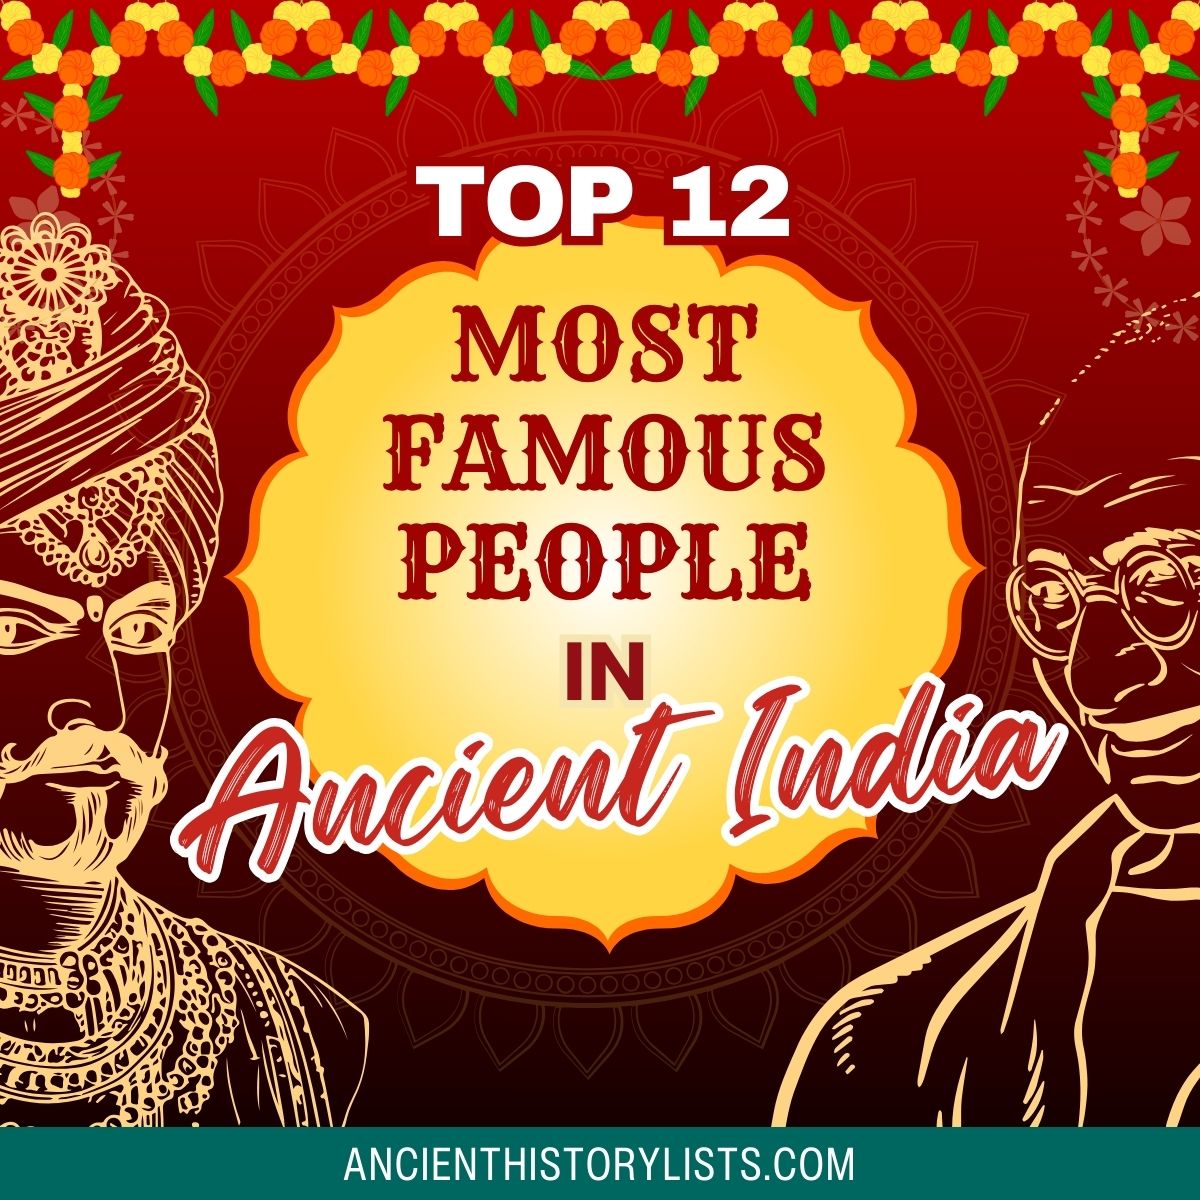 Most Famous People in Ancient India